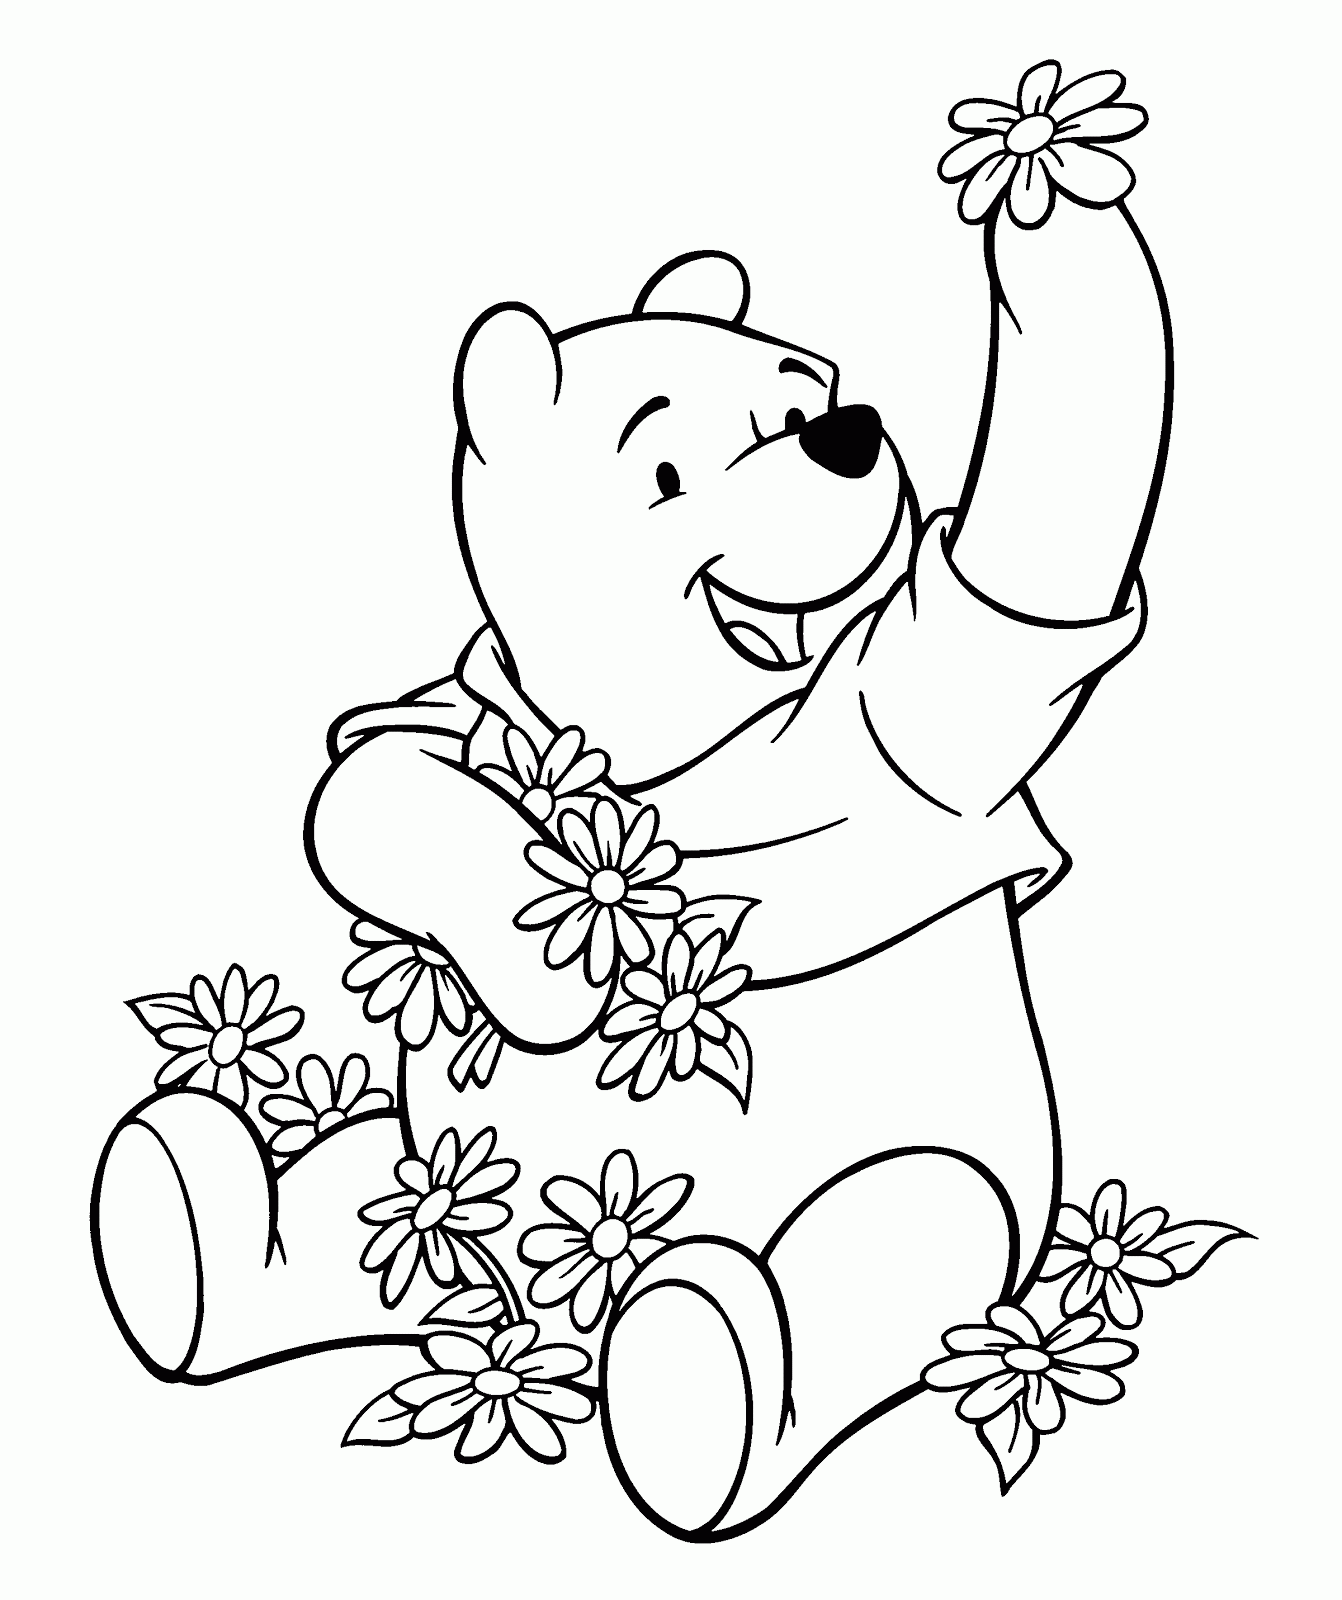 coloring pages of disney characters disney quotes coloring pages quotesgram characters disney pages coloring of 